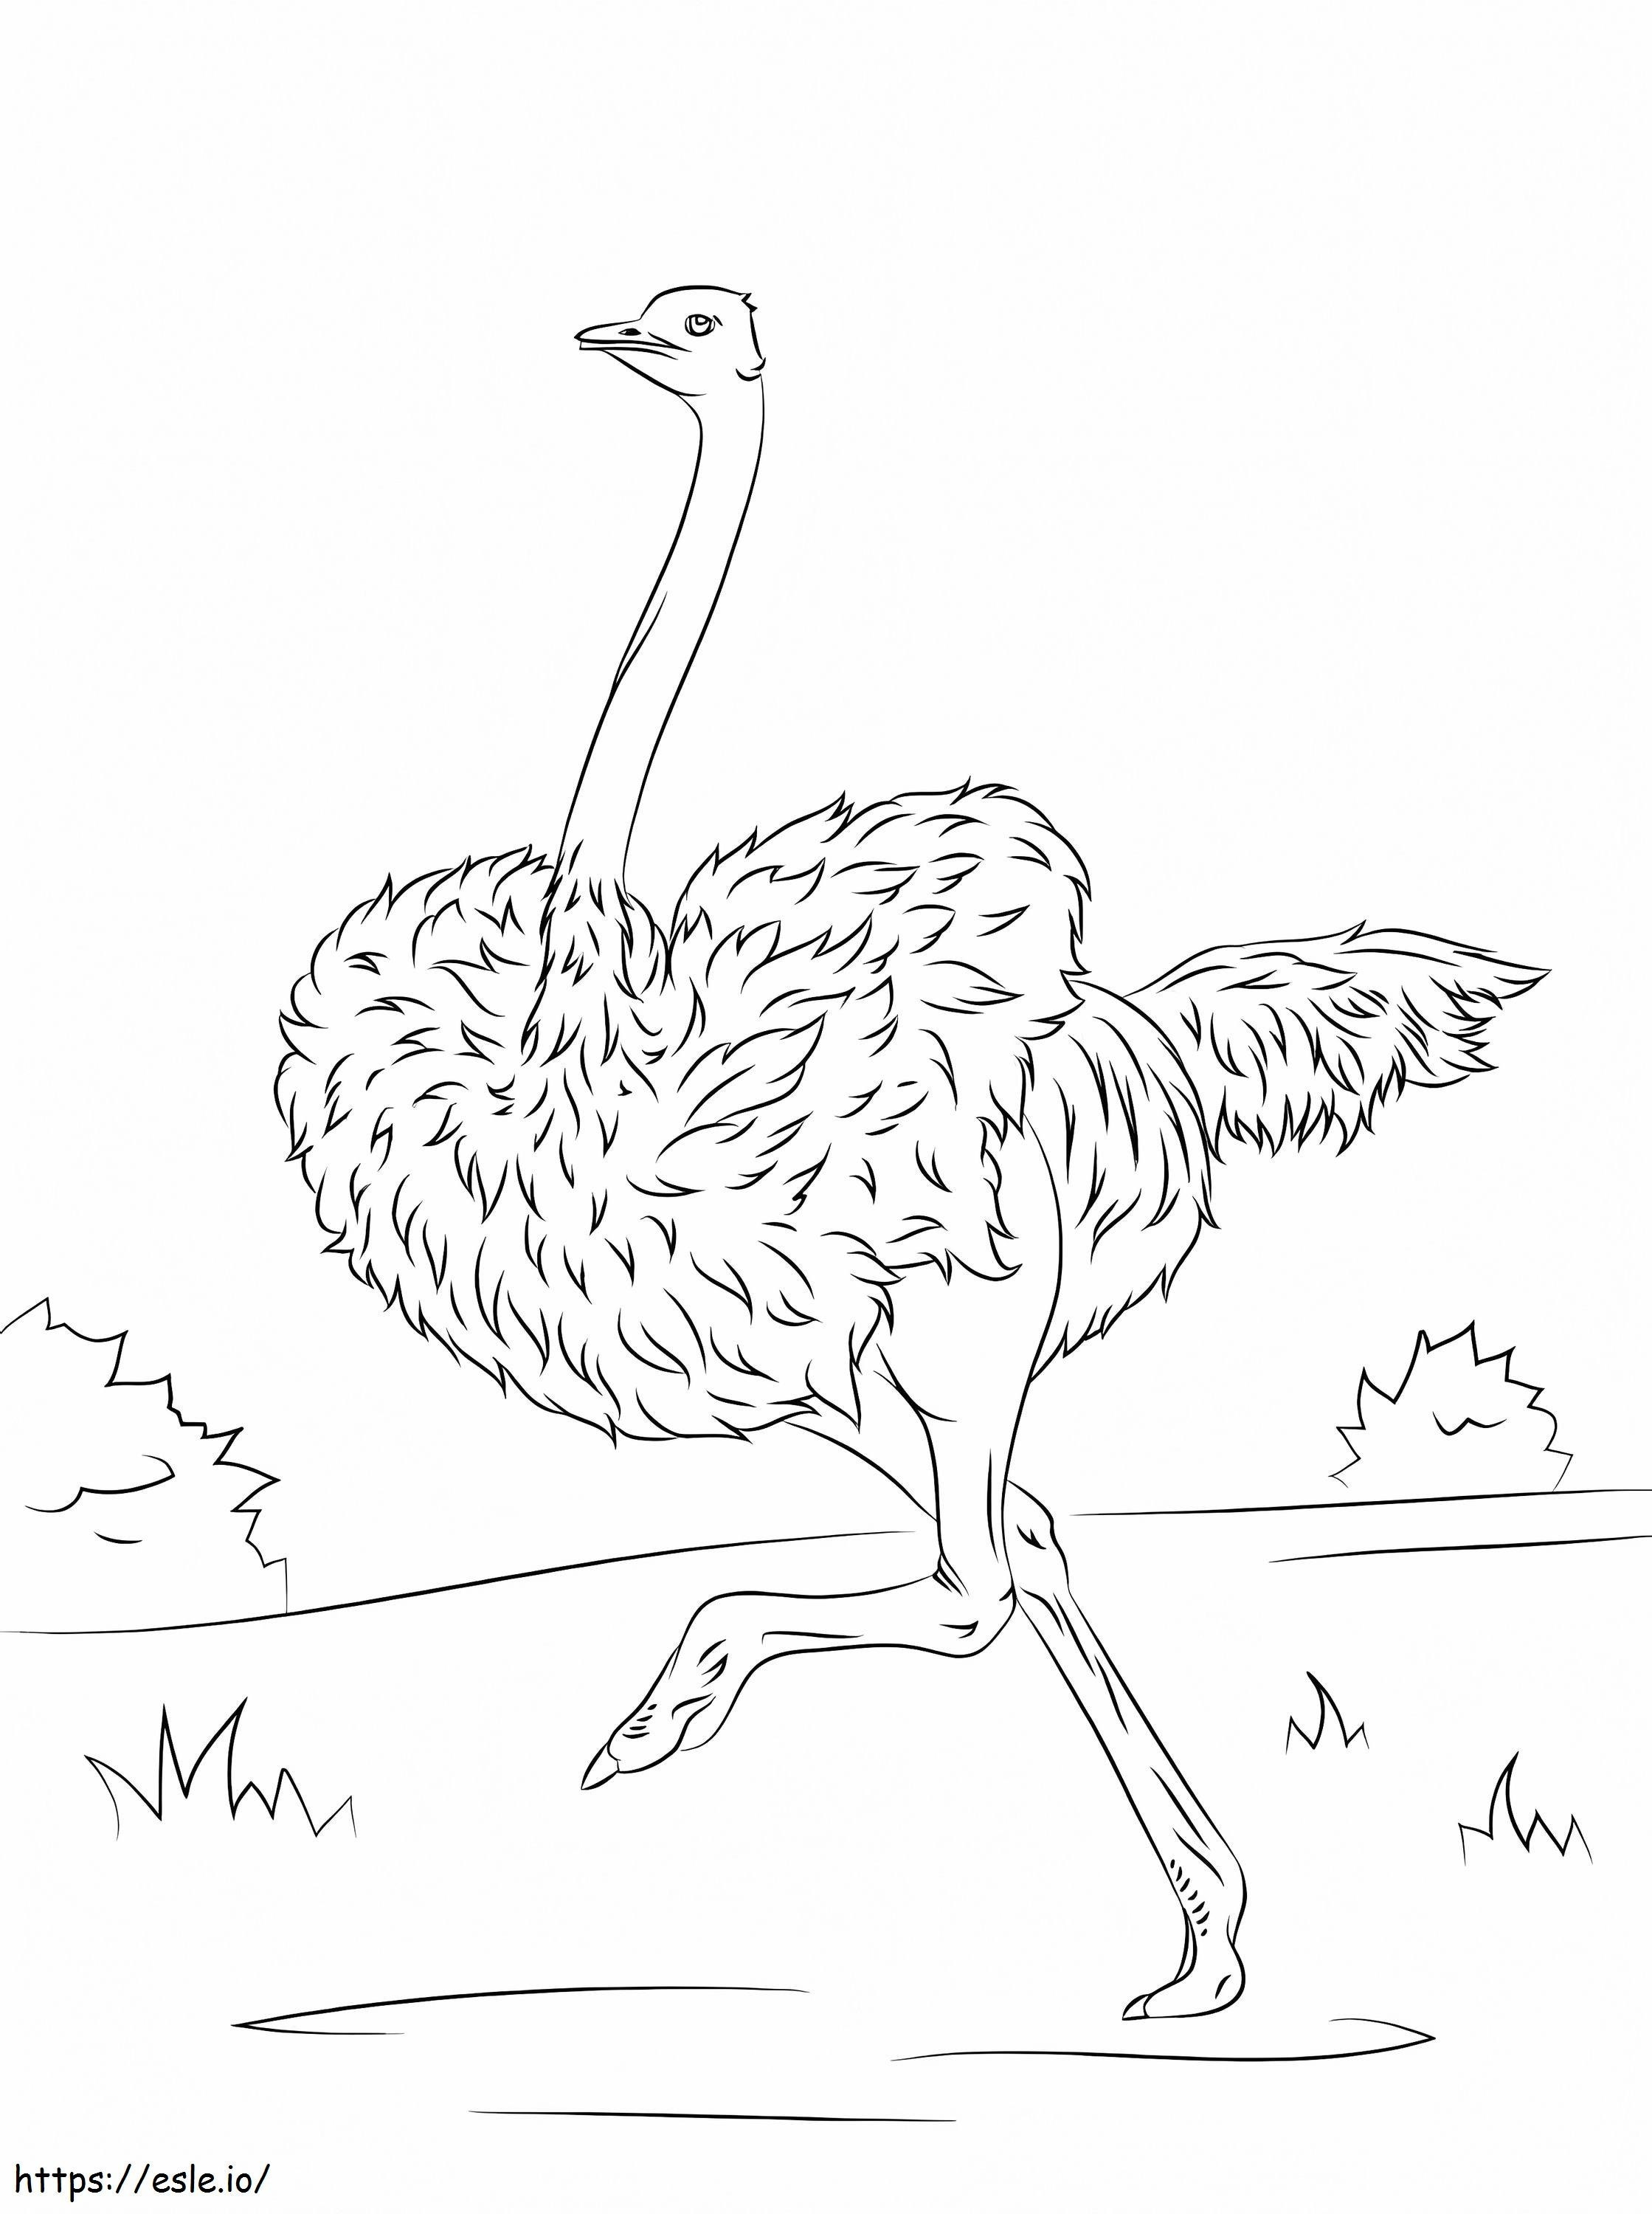 Ostrich Is Running coloring page